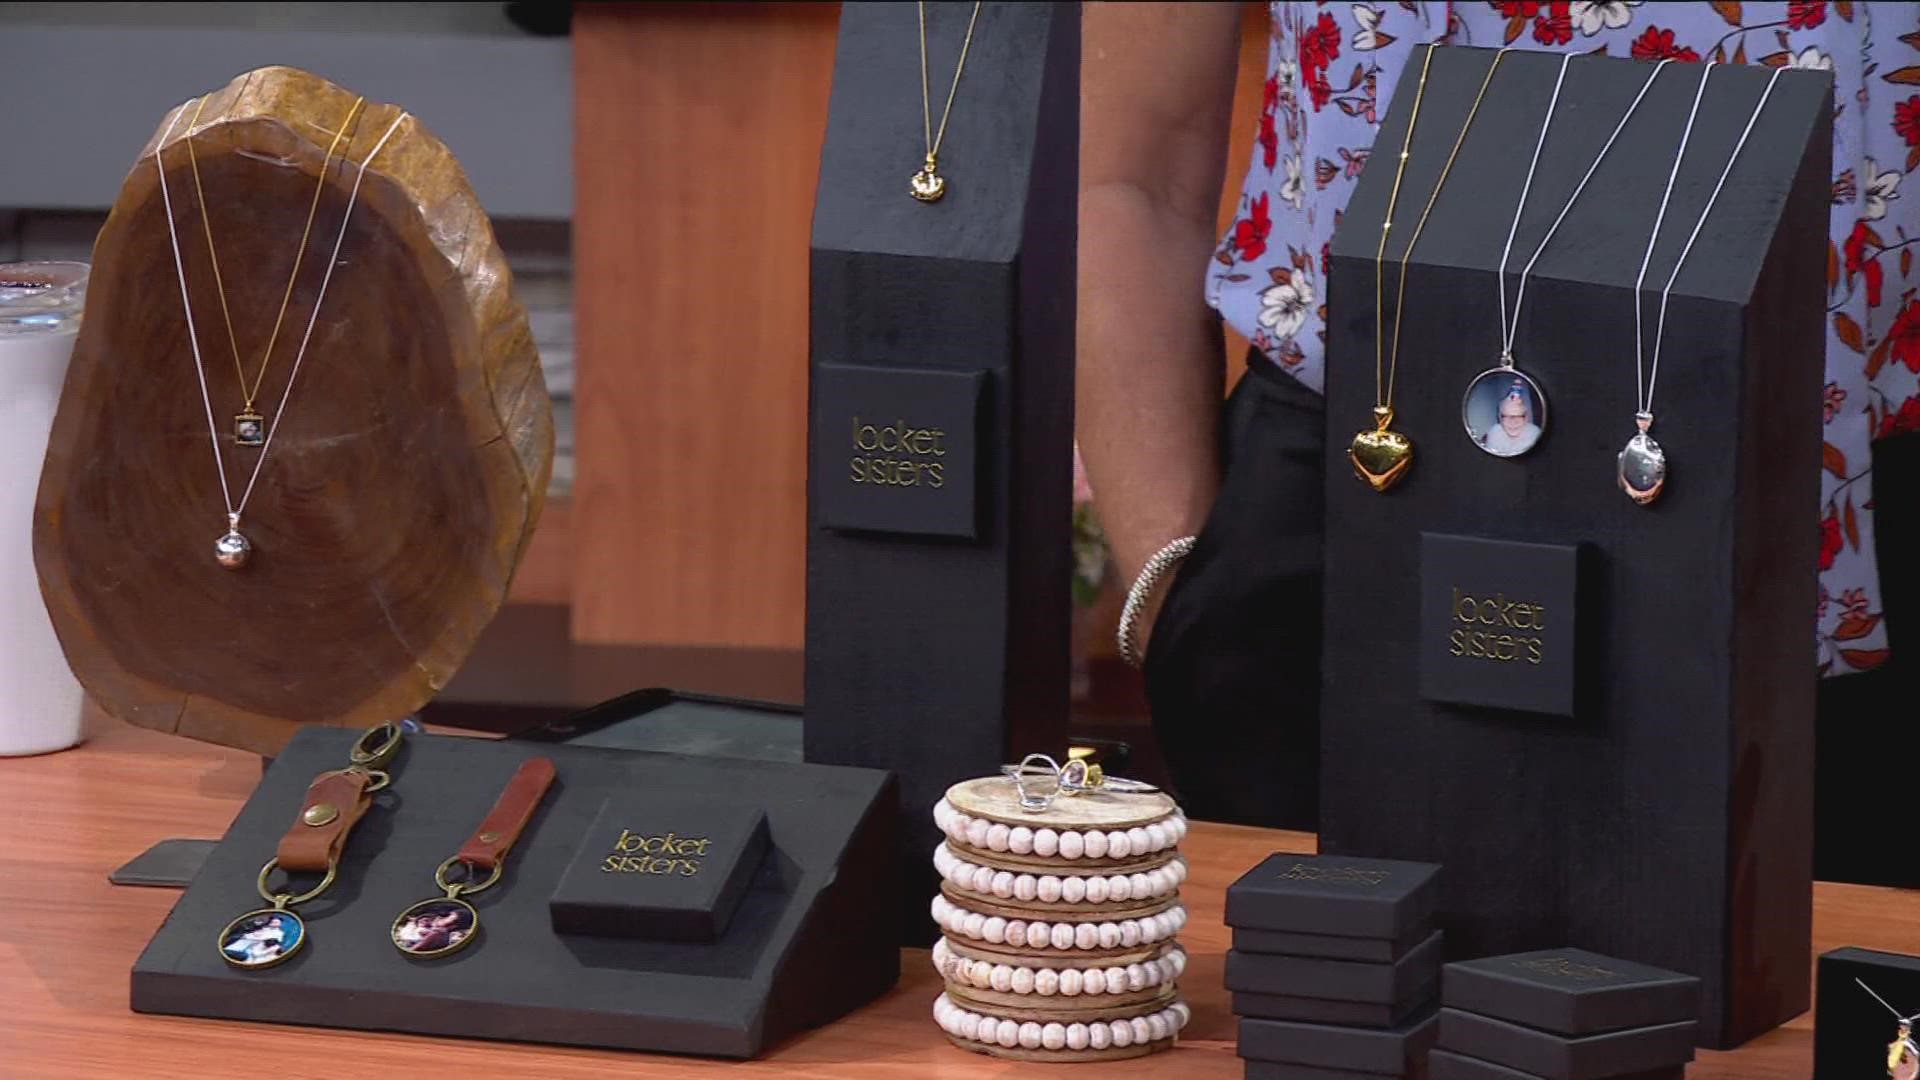 During KARE 11 Saturday, the owner of The Locket Sisters explained the process she and her team used to make one-of-a-kind heirlooms.